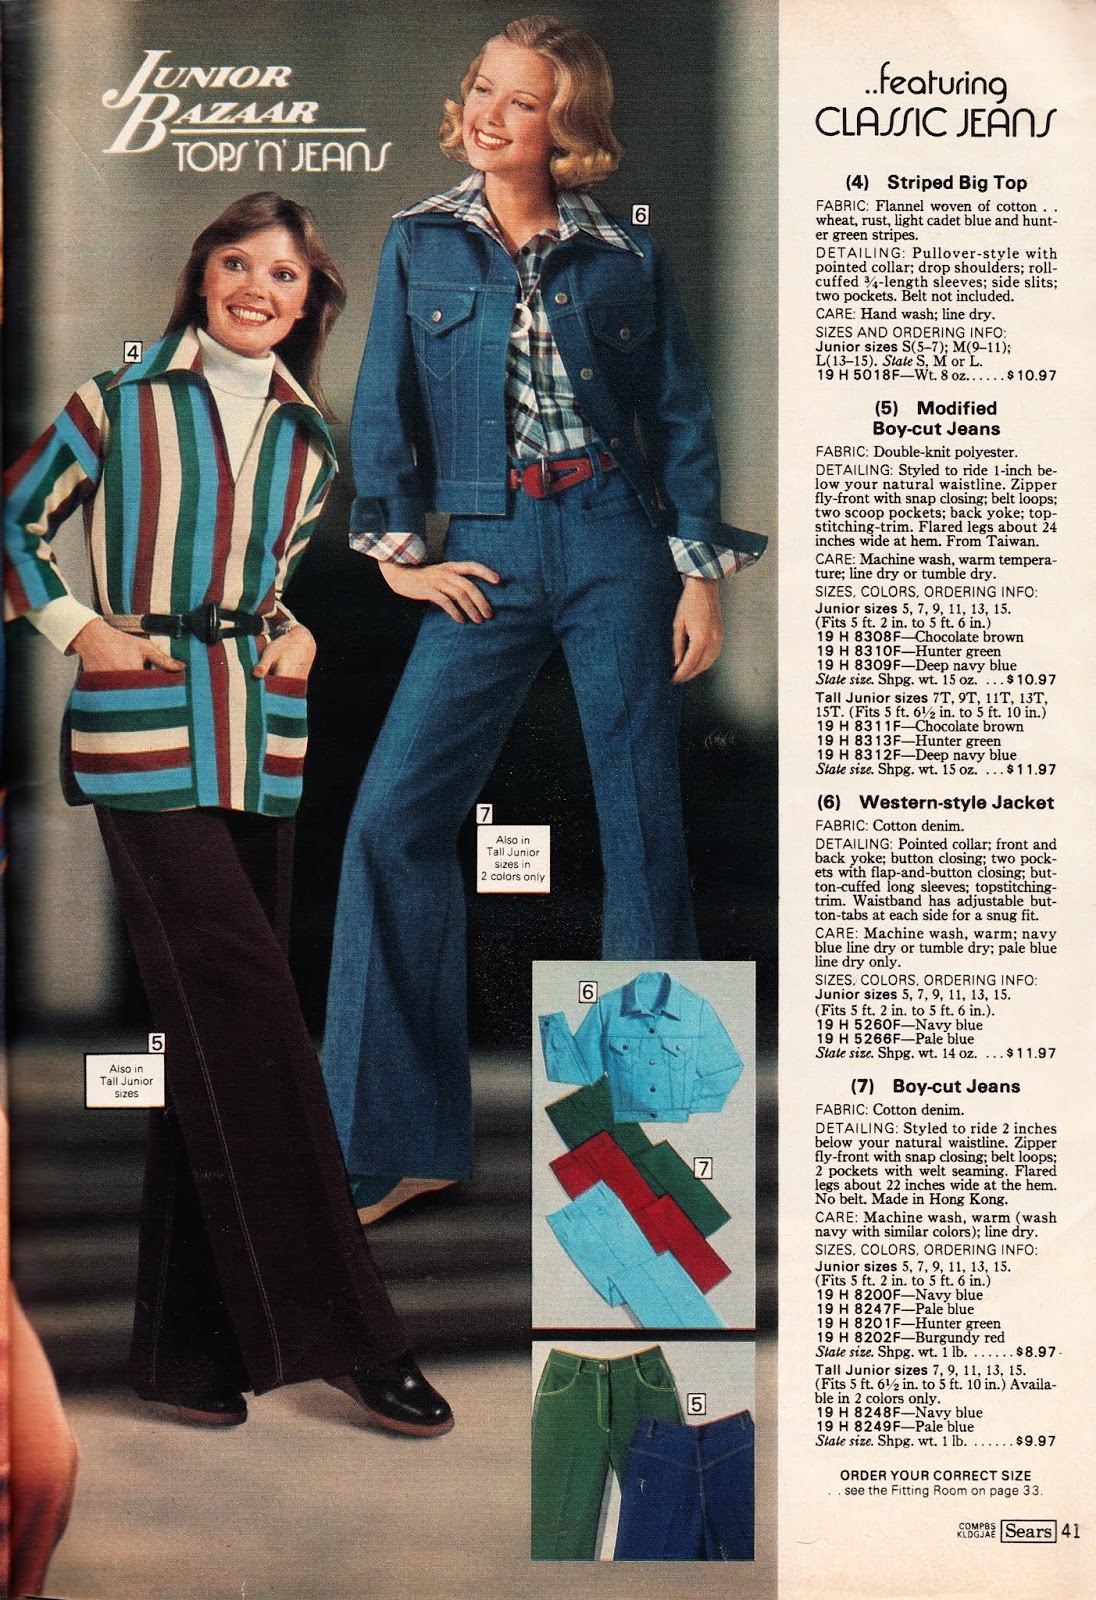 Kathy Loghry Blogspot: Classic Jeans of the 70s!!